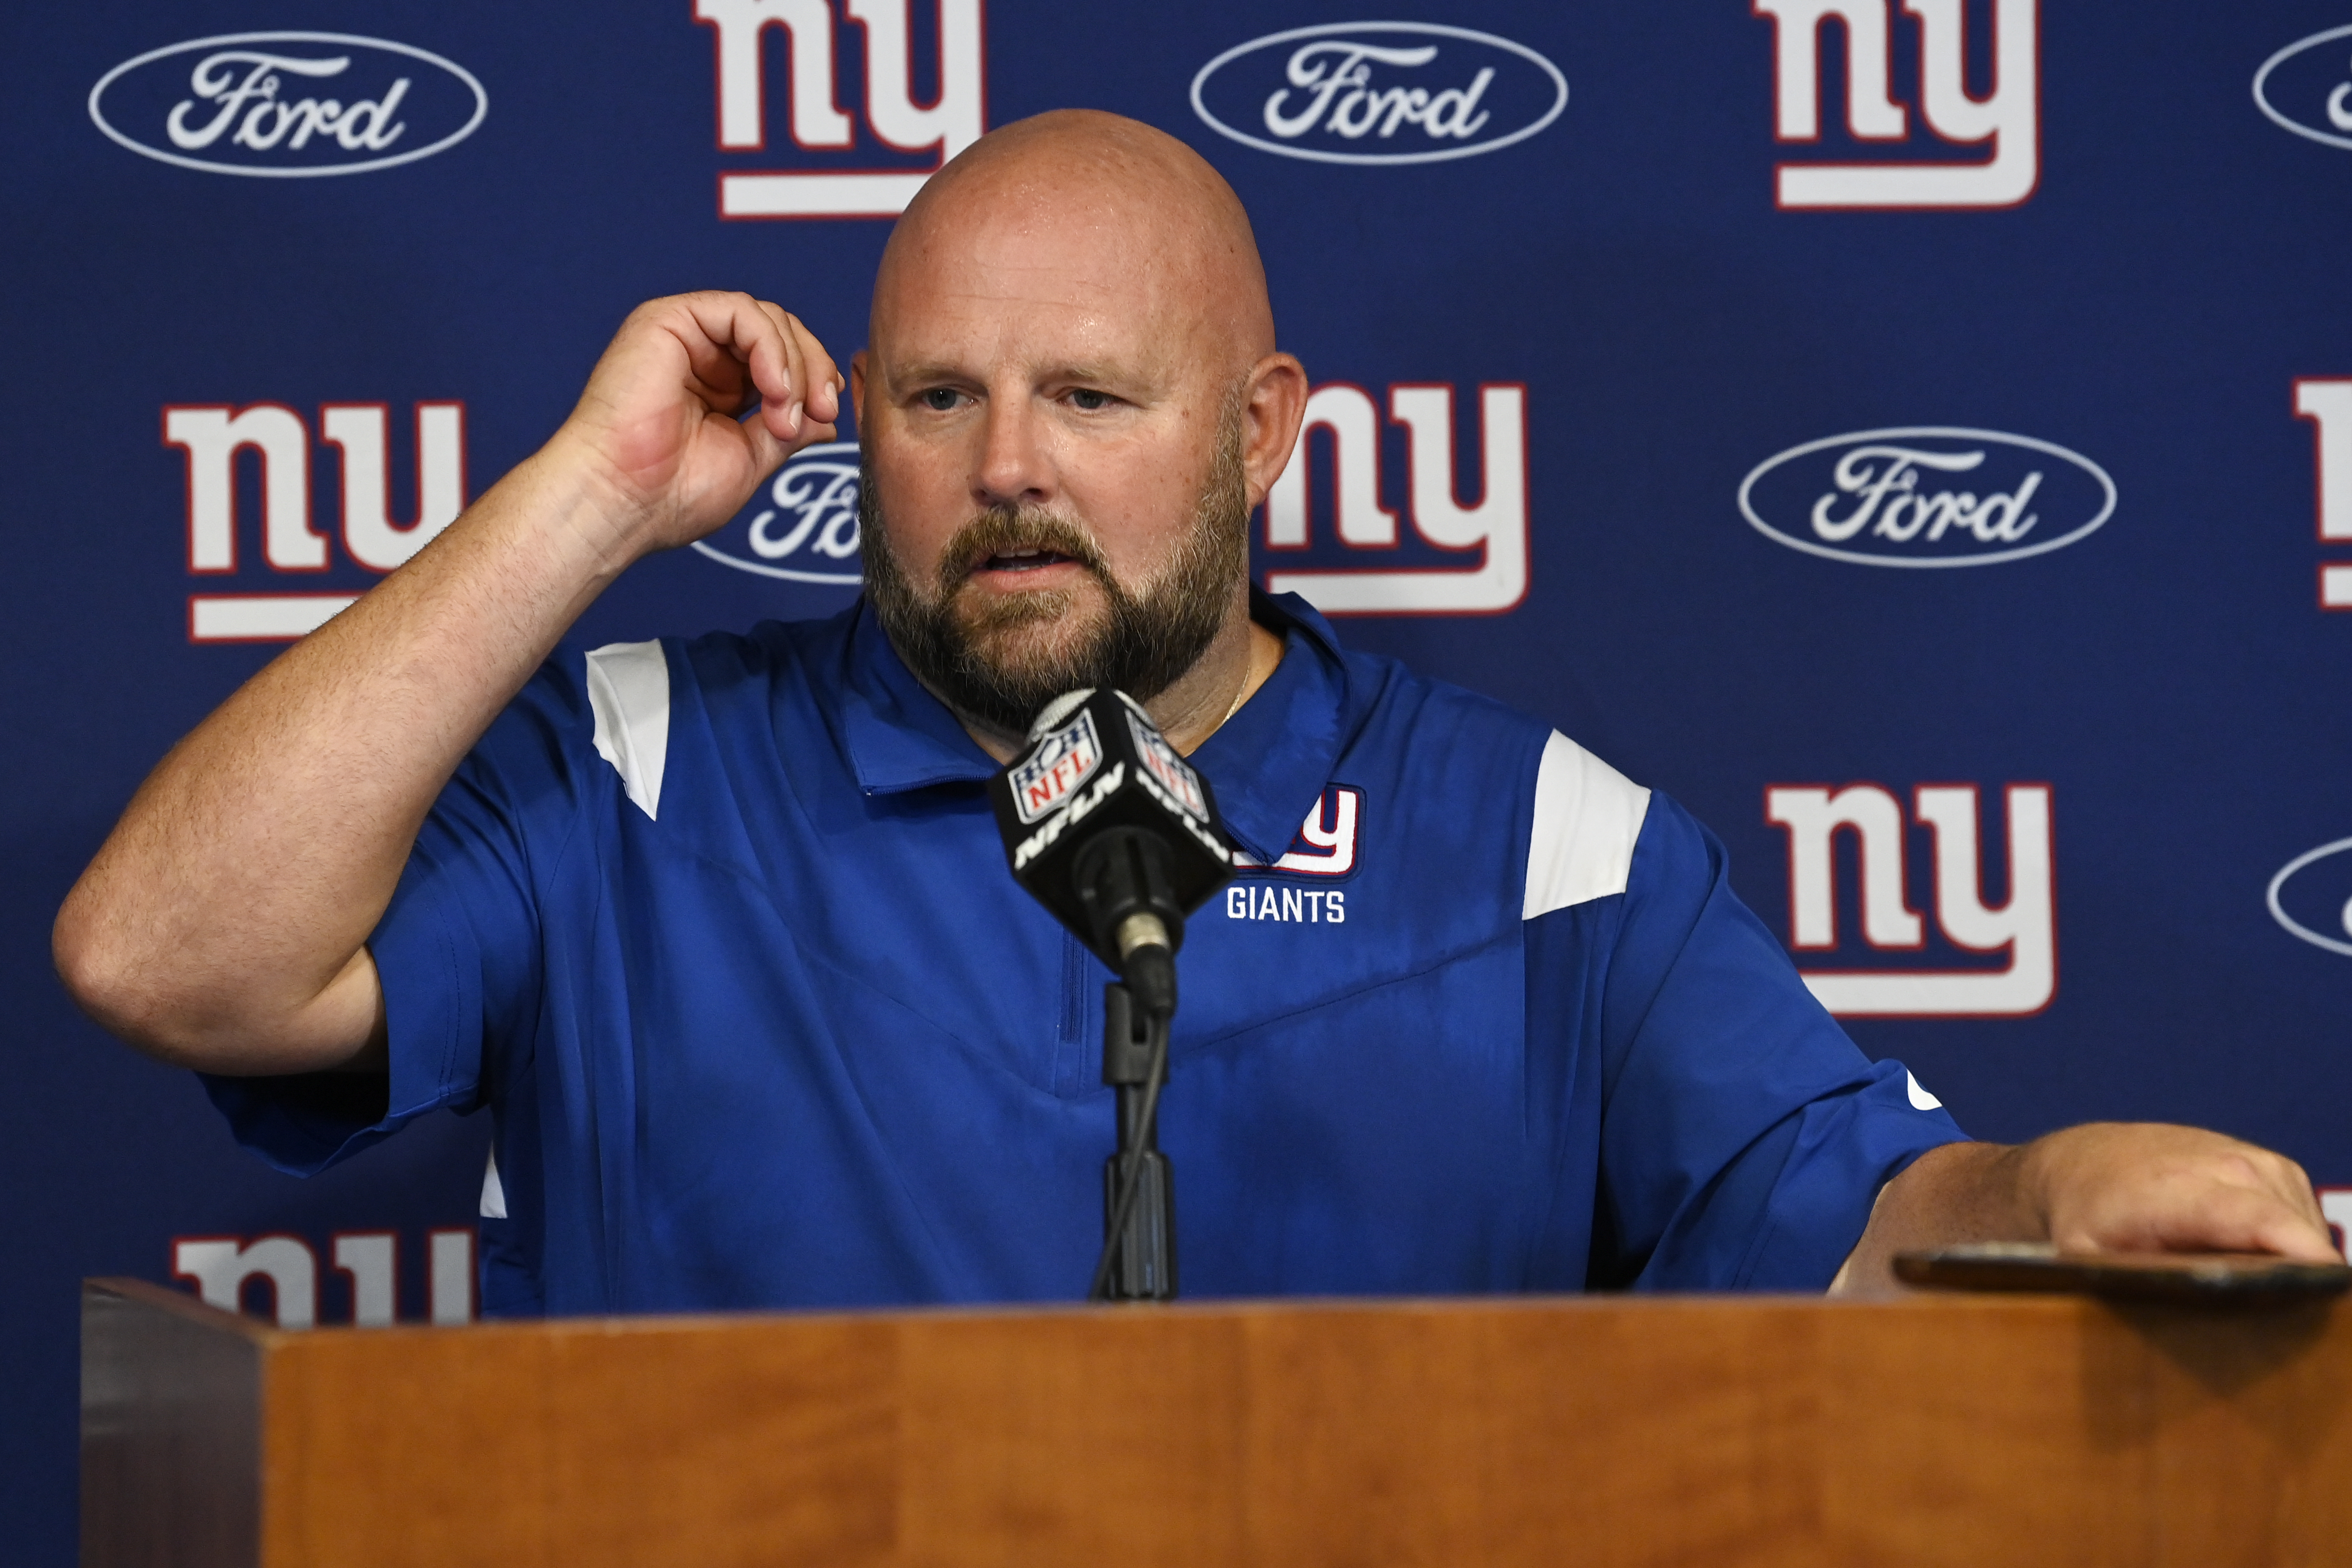 GIANTS SCHEDULE RELEASE SWEEPSTAKES  Two tickets and one parking pass to  any Giants 2022 regular season game during the 2022 season, an autographed  Brian Daboll Mini-helmet, and a tour of the